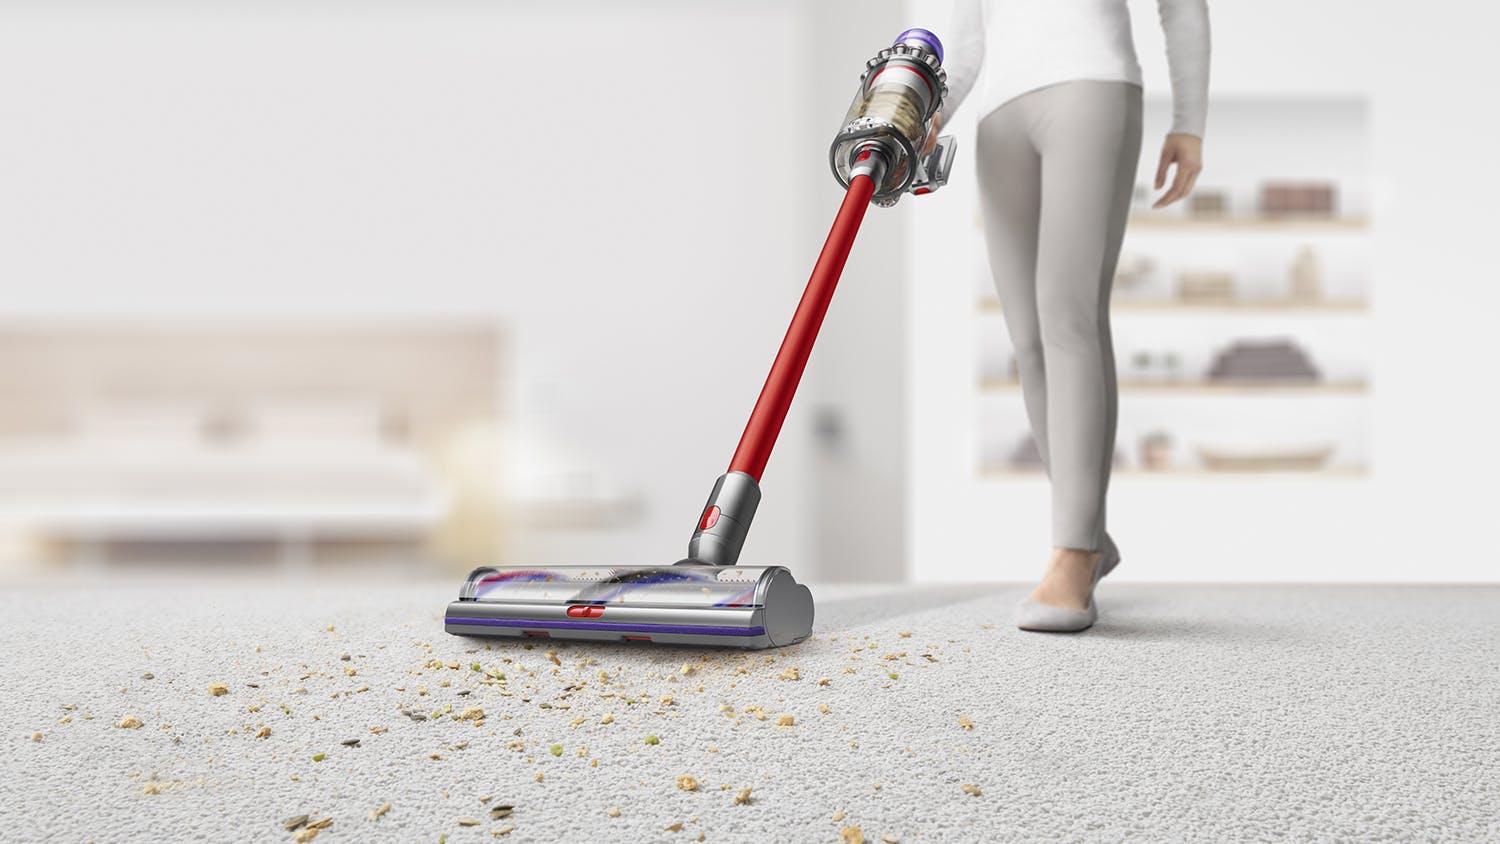 Dyson Outsize Absolute Handstick Vacuum Cleaner